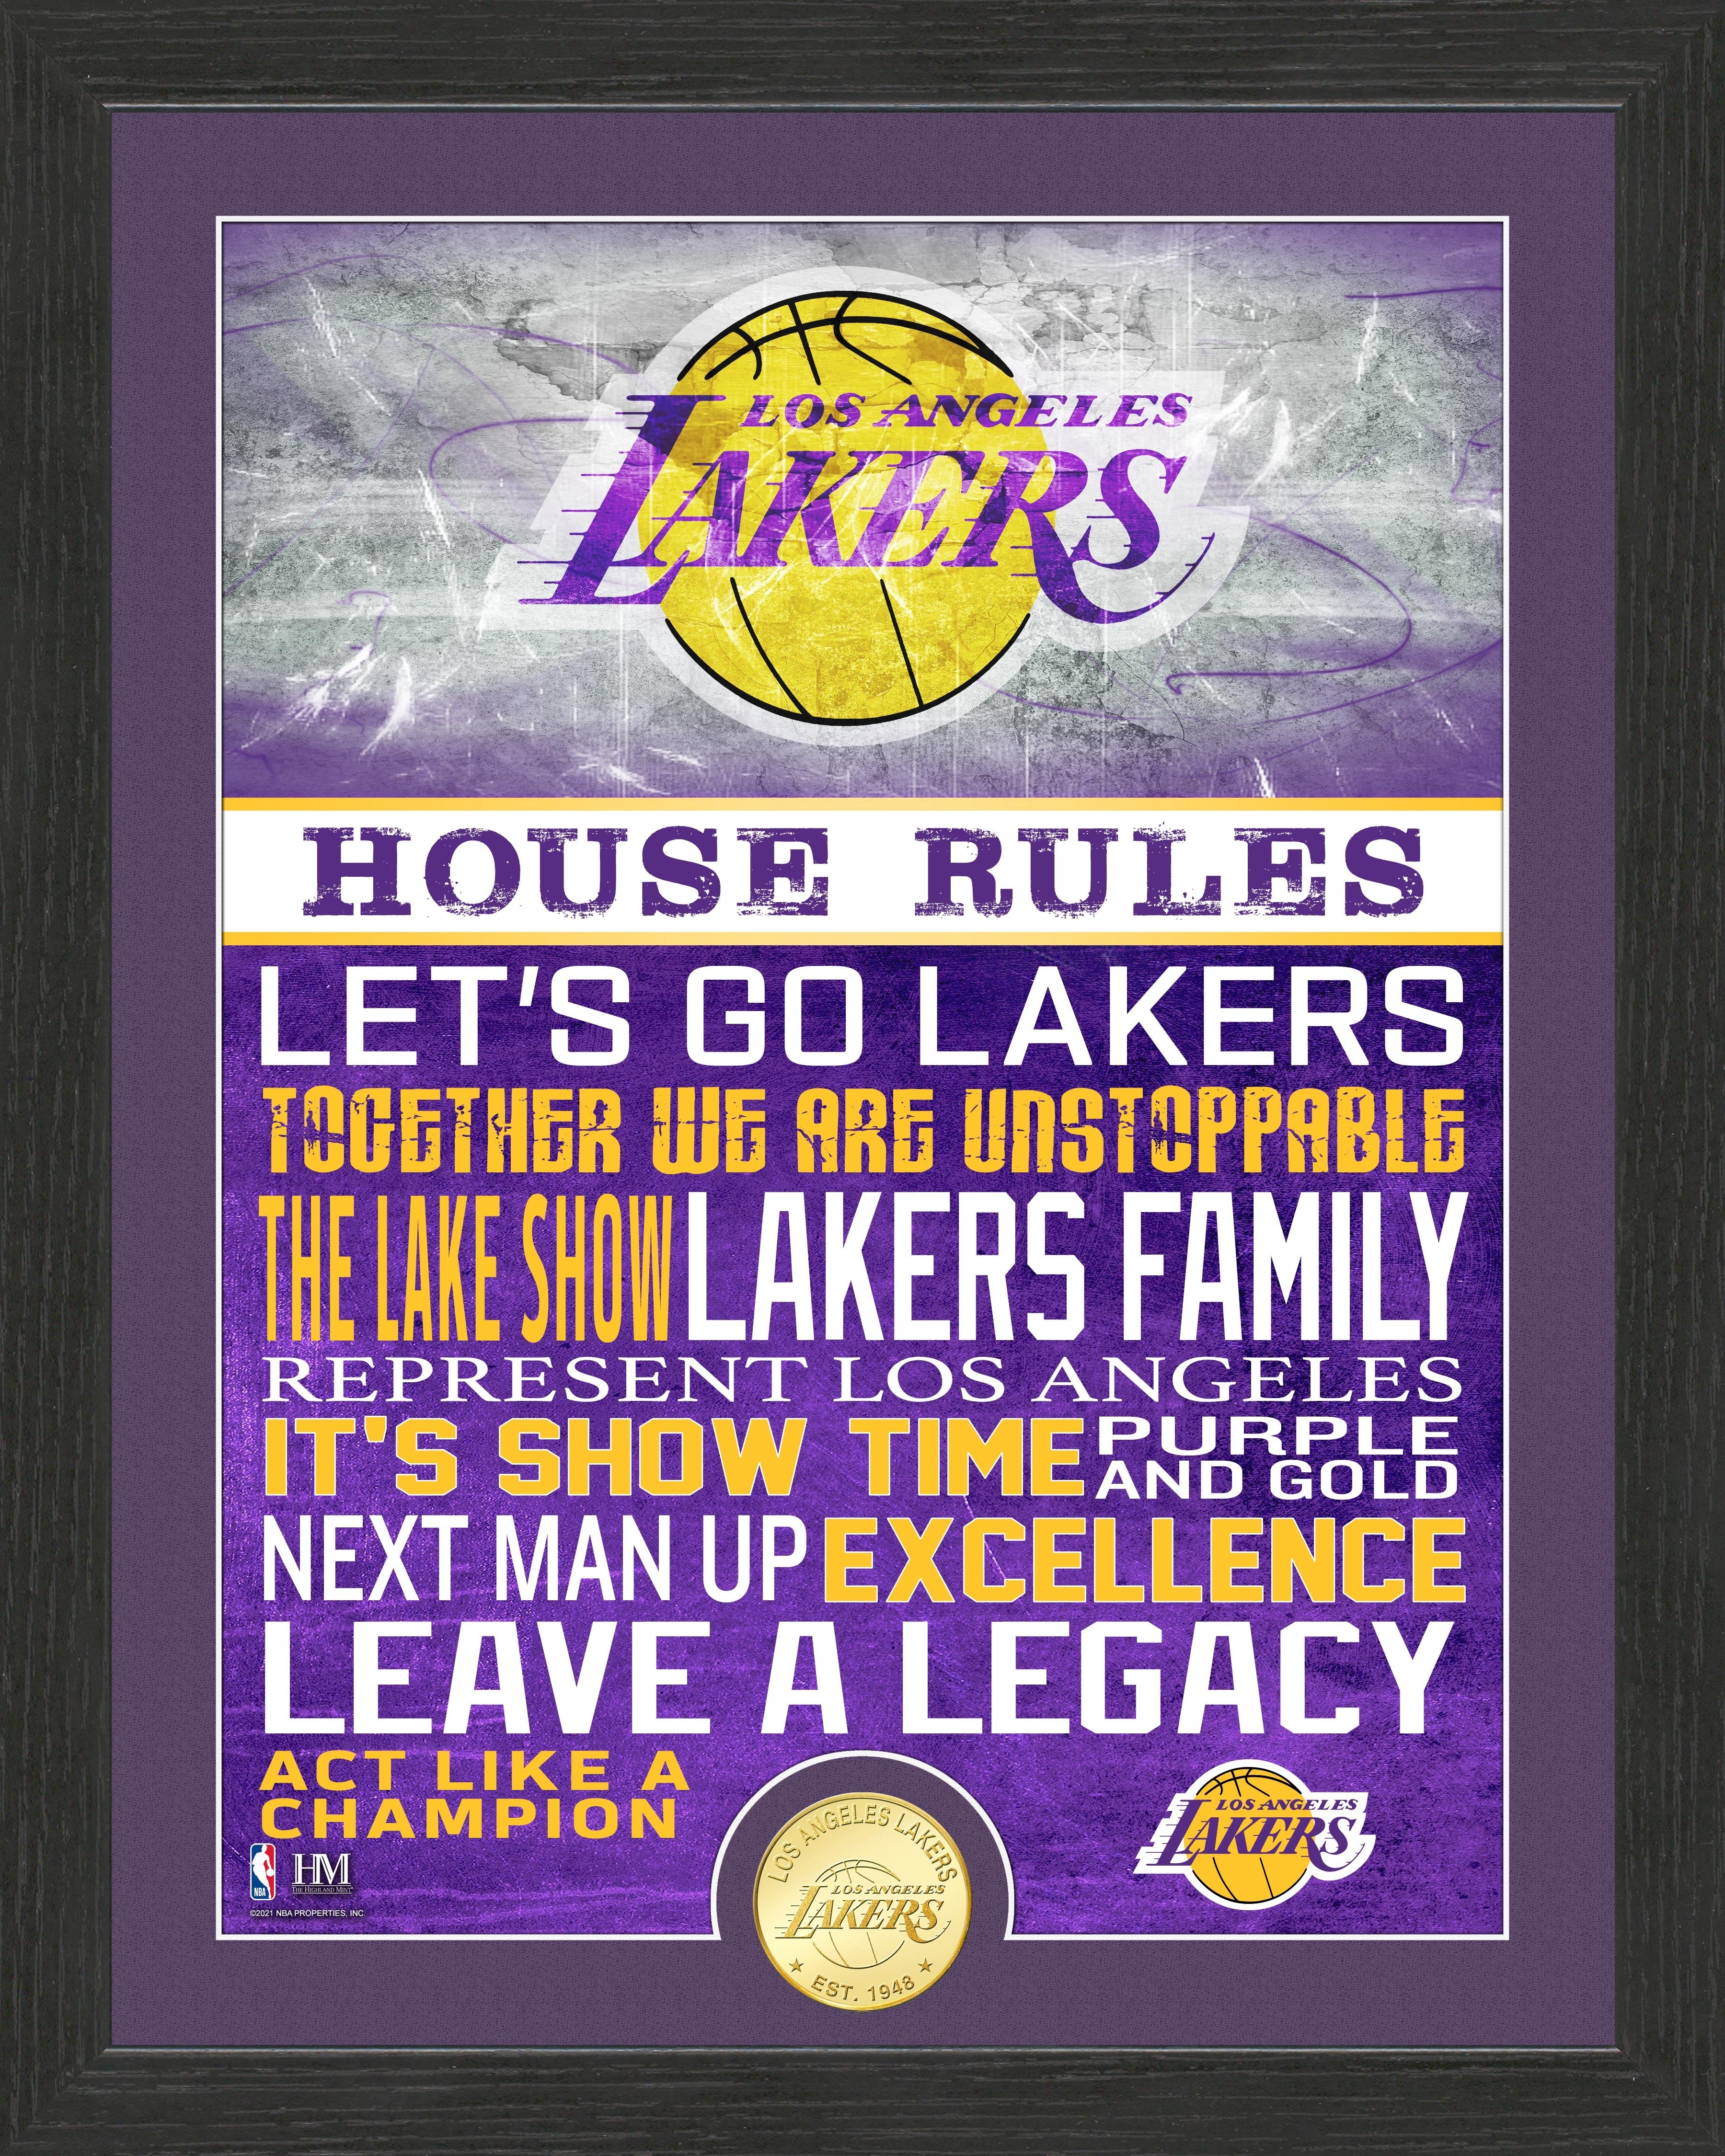 Los Angeles Lakers House Rules Bronze Coin Photo Mint